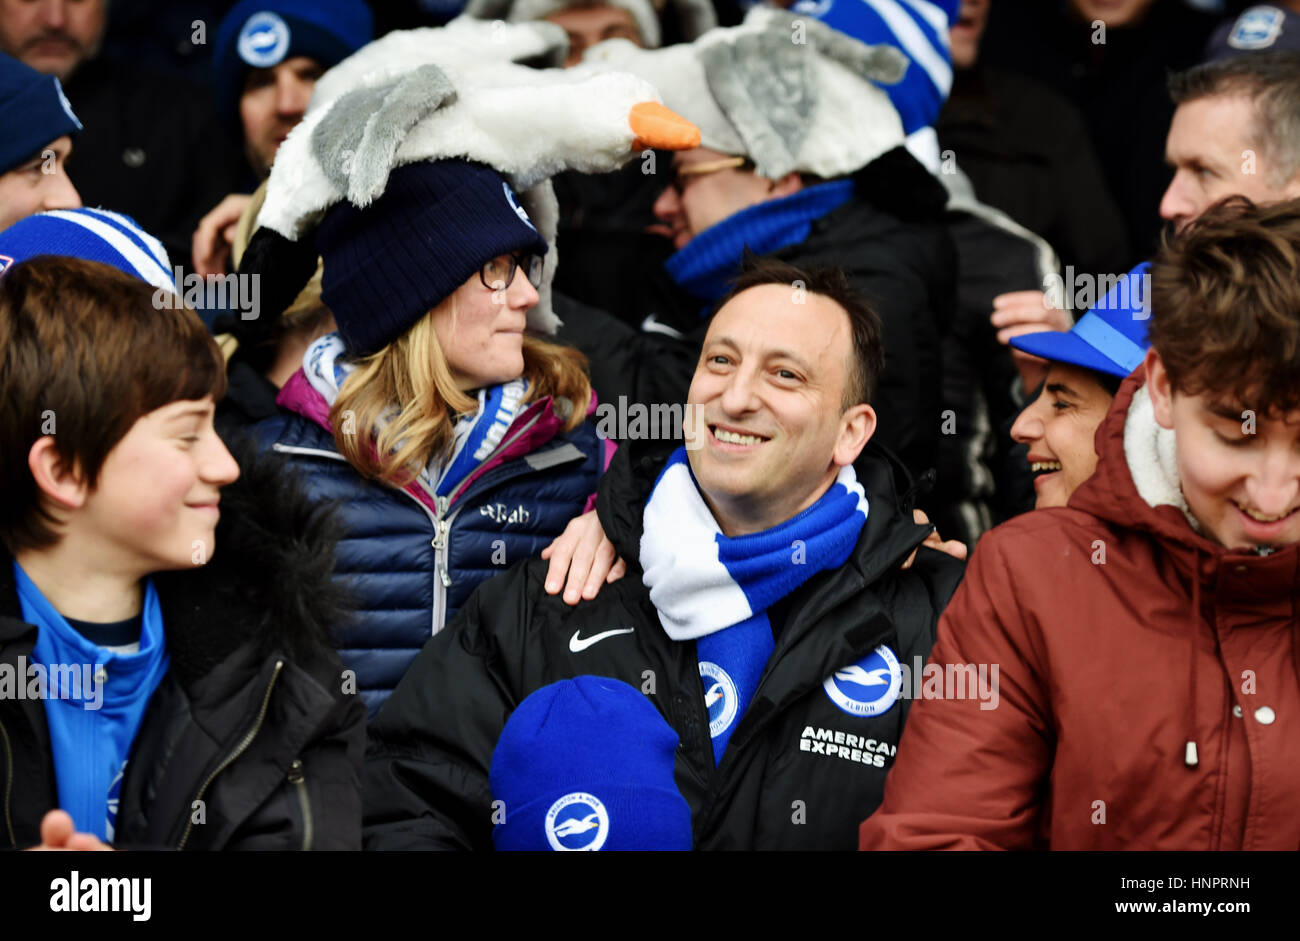 Brighton Football Club chairman Tony Bloom amongst the fans during the Sky Bet Championship match between Brentford and Brighton and Hove Albion at Griffin Park in London. February 5, 2017. Simon  Dack / Telephoto Images Stock Photo